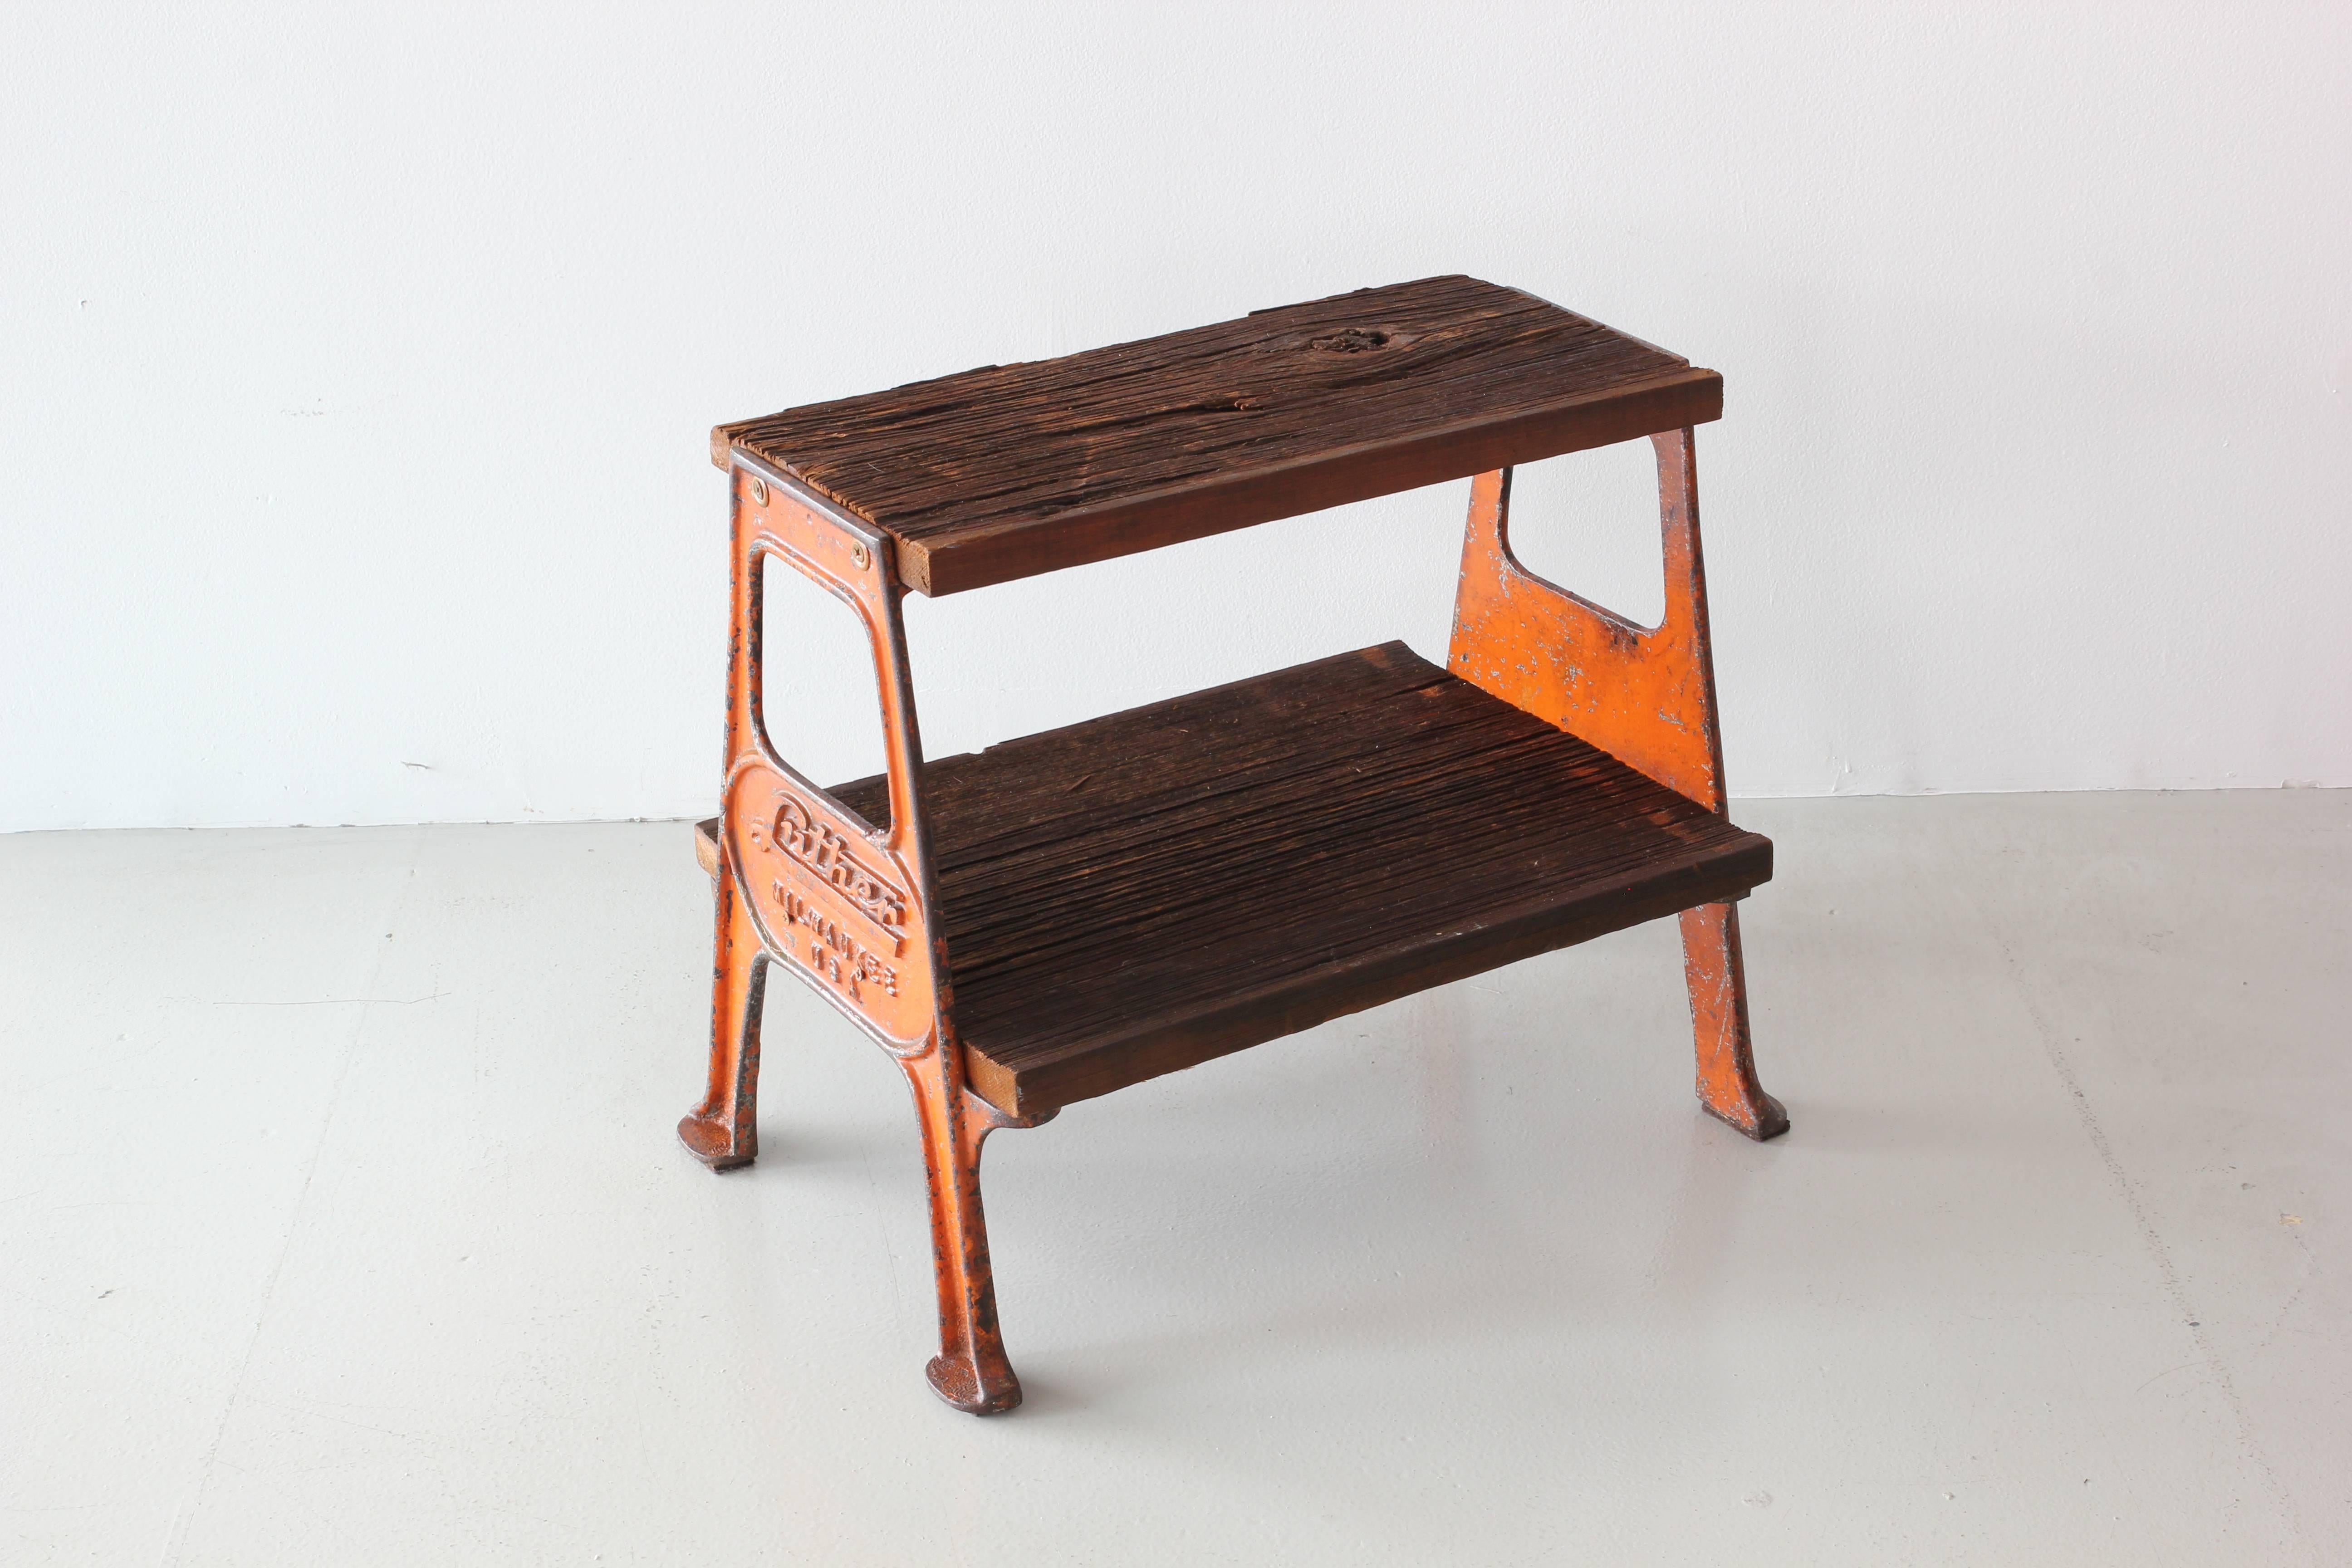 Great vintage railroad step stool with original orange painted steel frame and raw wood steps. Fantastic chipped paint on frame that reads 